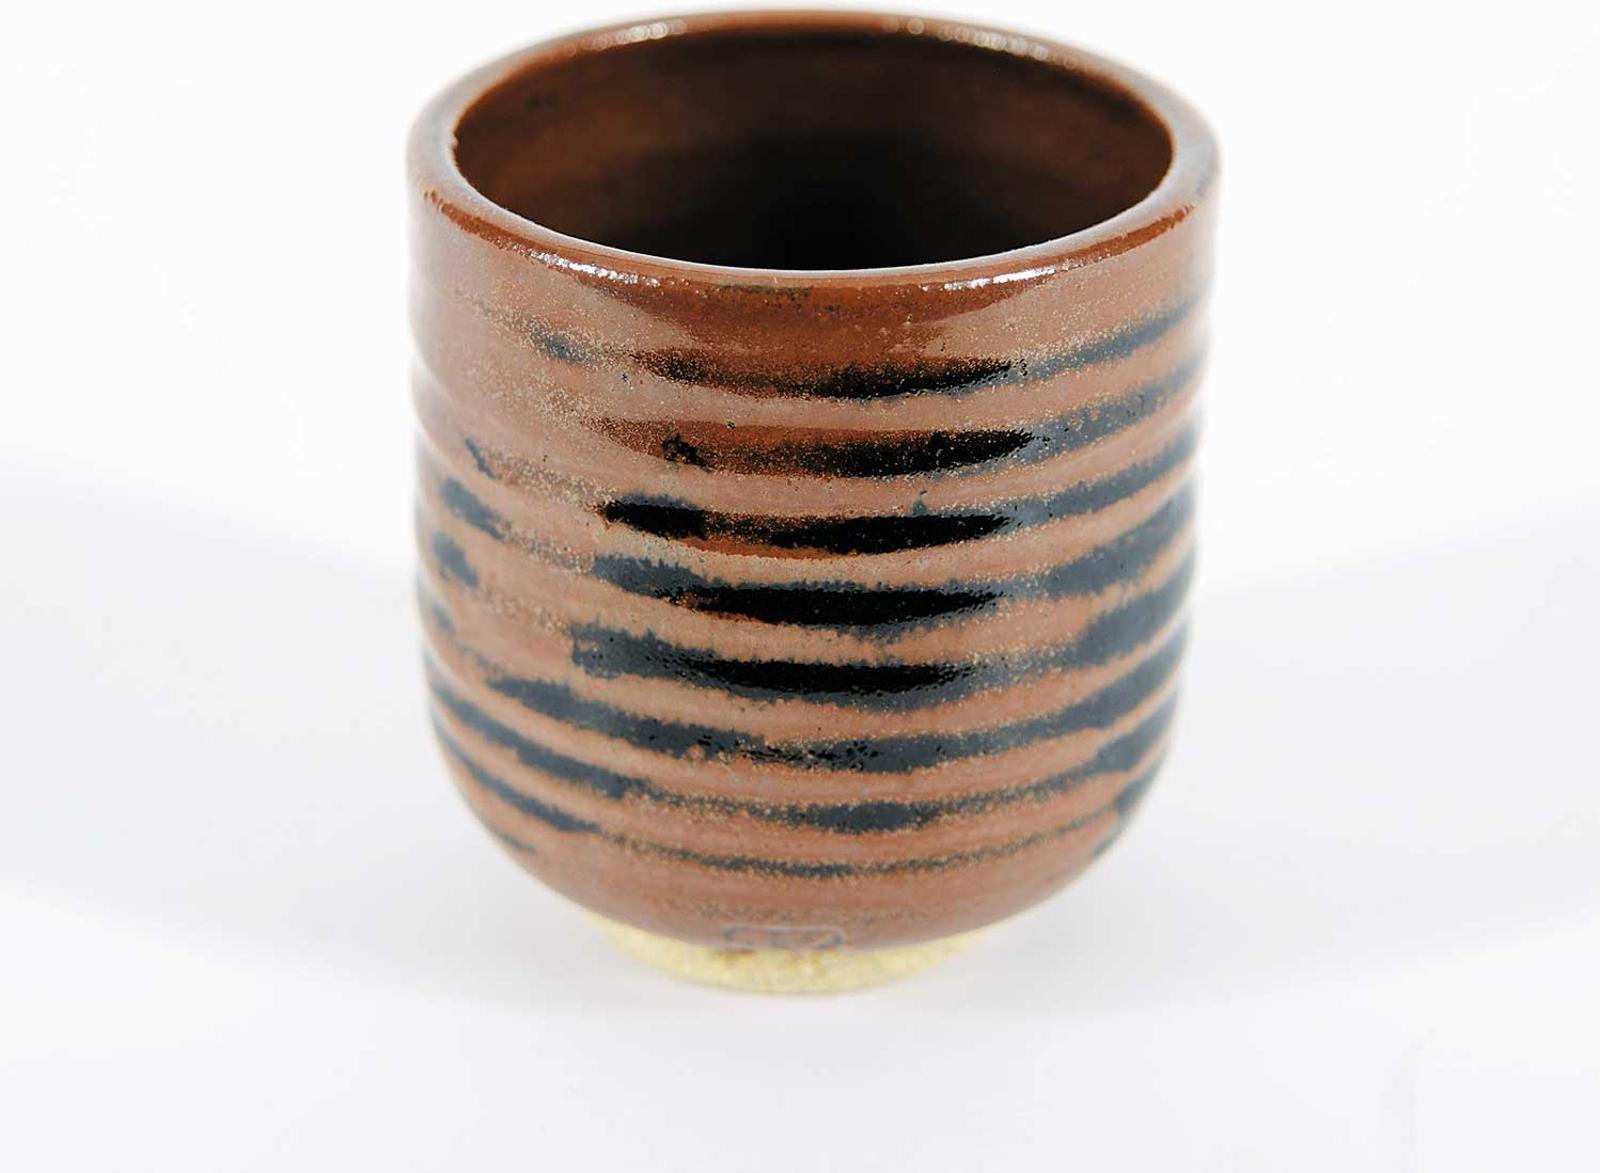 Kathleen Hamilton - Untitled - Ridged Brown and Black Cup